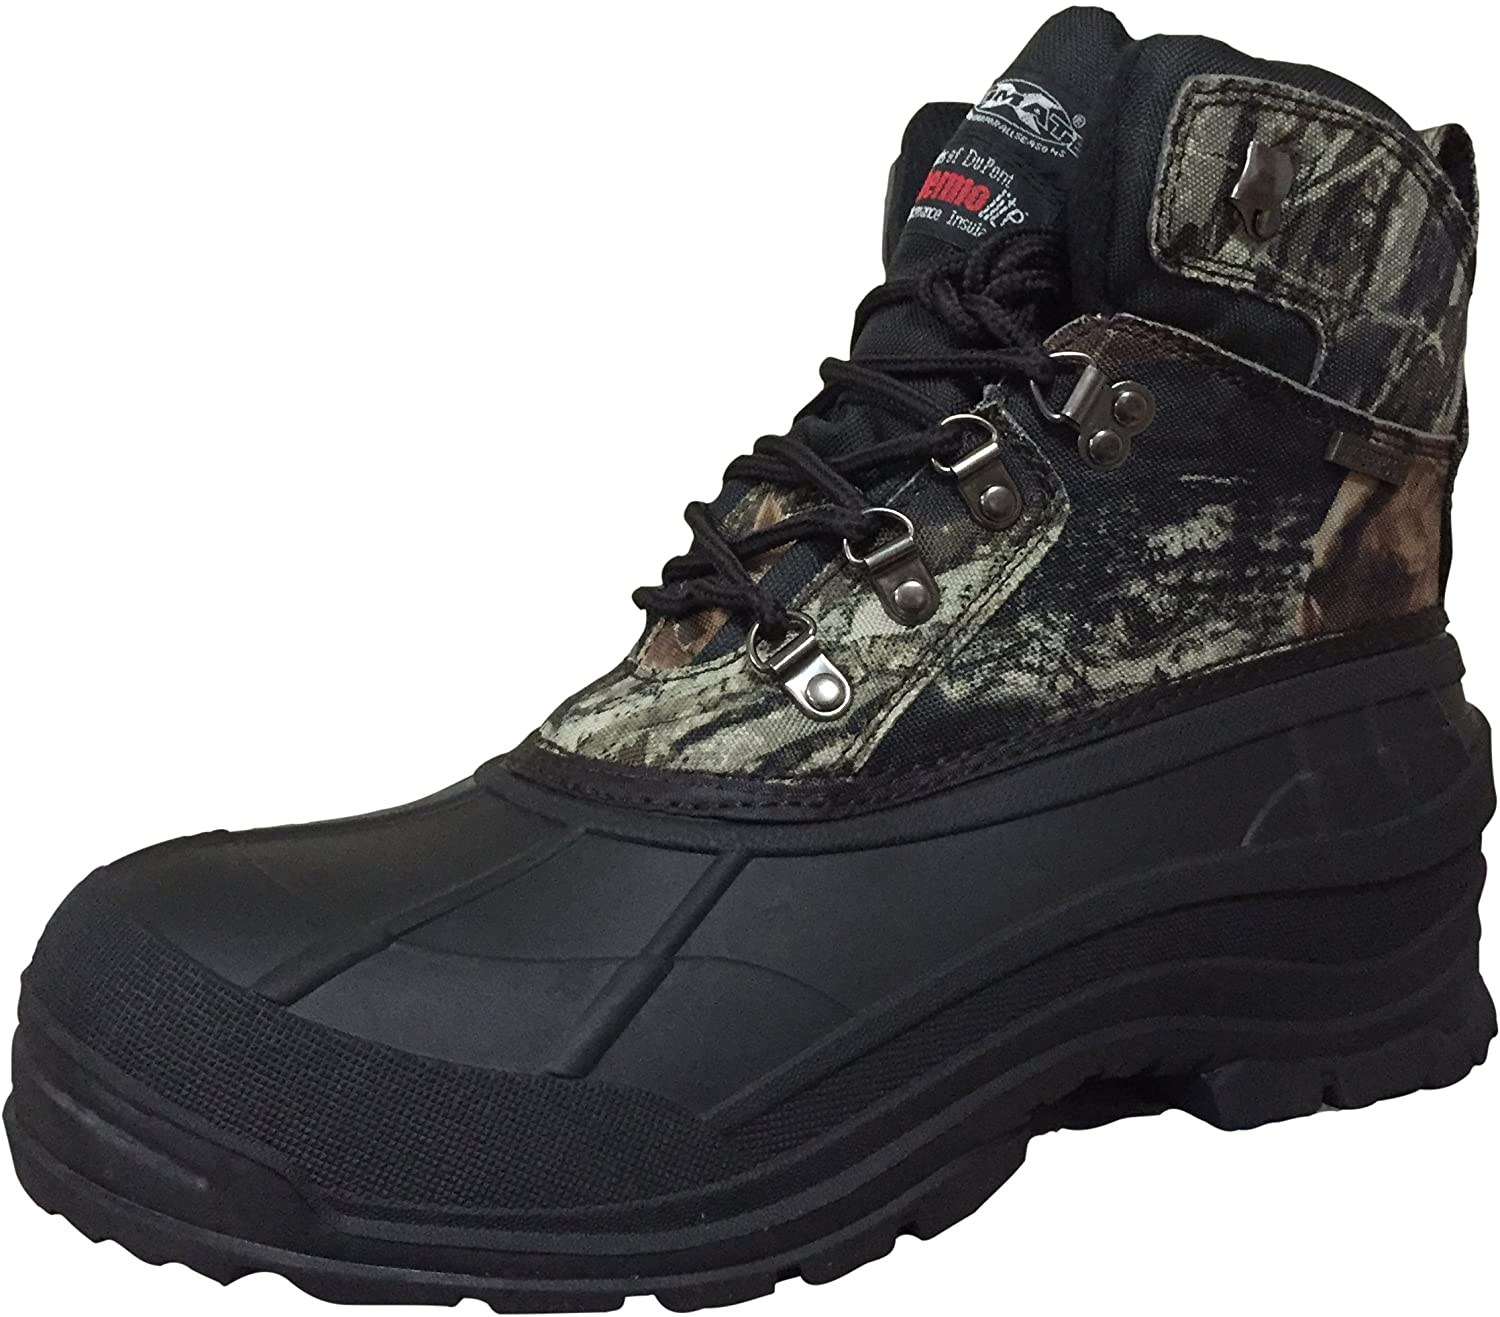 Men's Winter Snow Boots Camouflage Thermolite Insulated Hunting Shoes - image 1 of 5